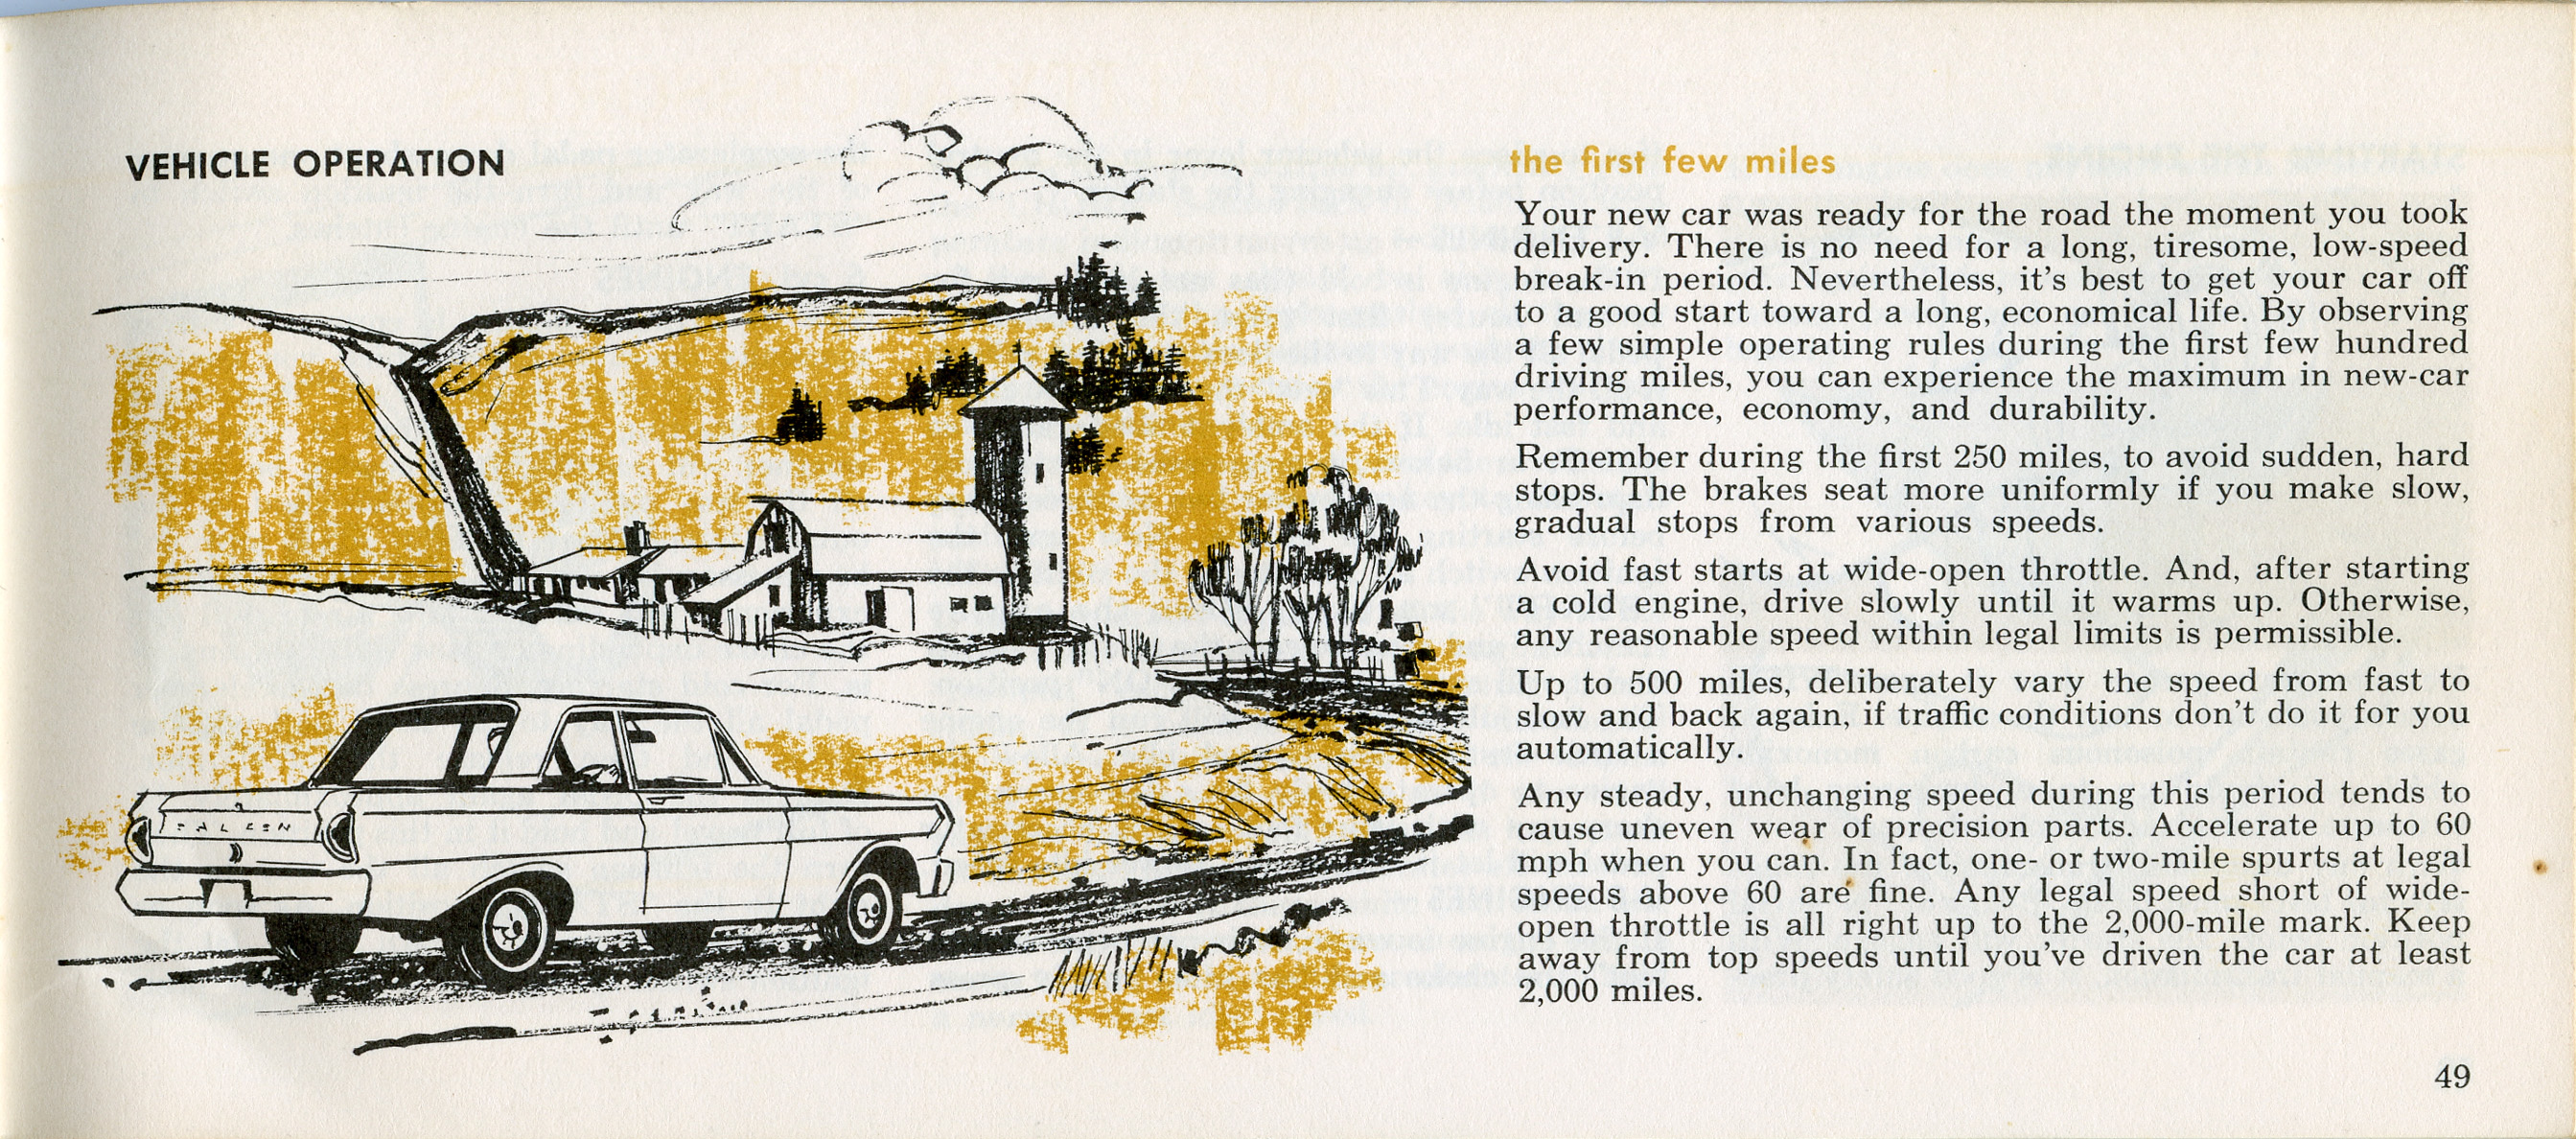 1964_Ford_Falcon_Owners_Manual-49